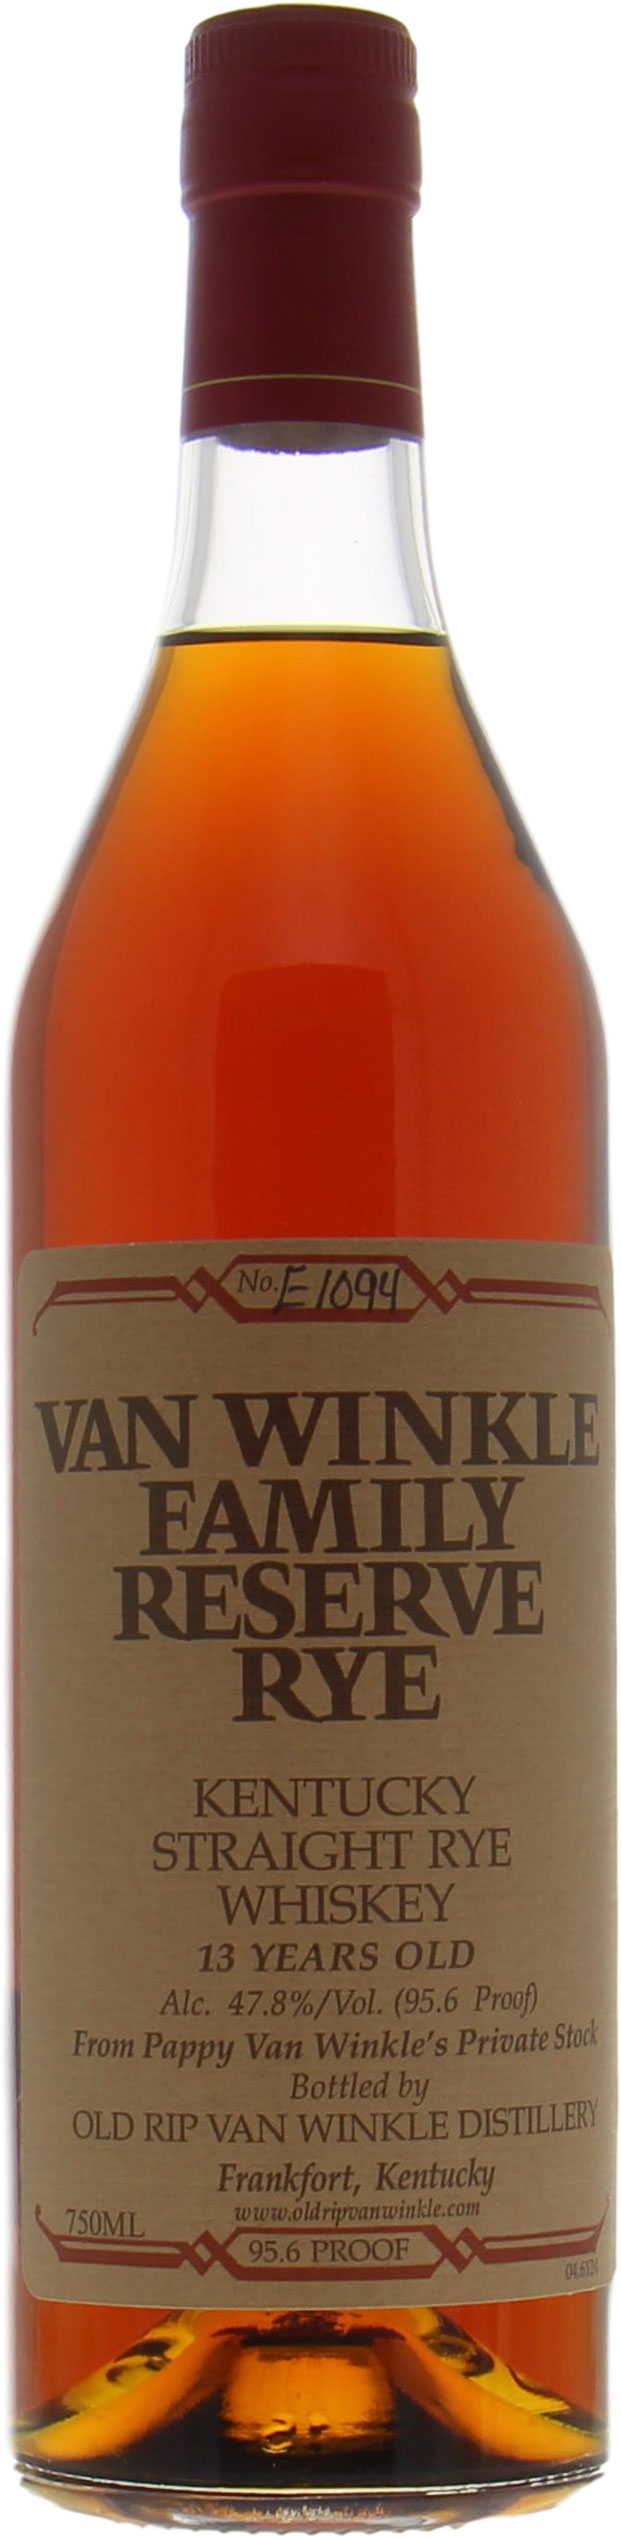 Van Winkle - Rye 13 Years Old Family Reserve No. E1094 95.6 Proof 47.8% NV Perfect